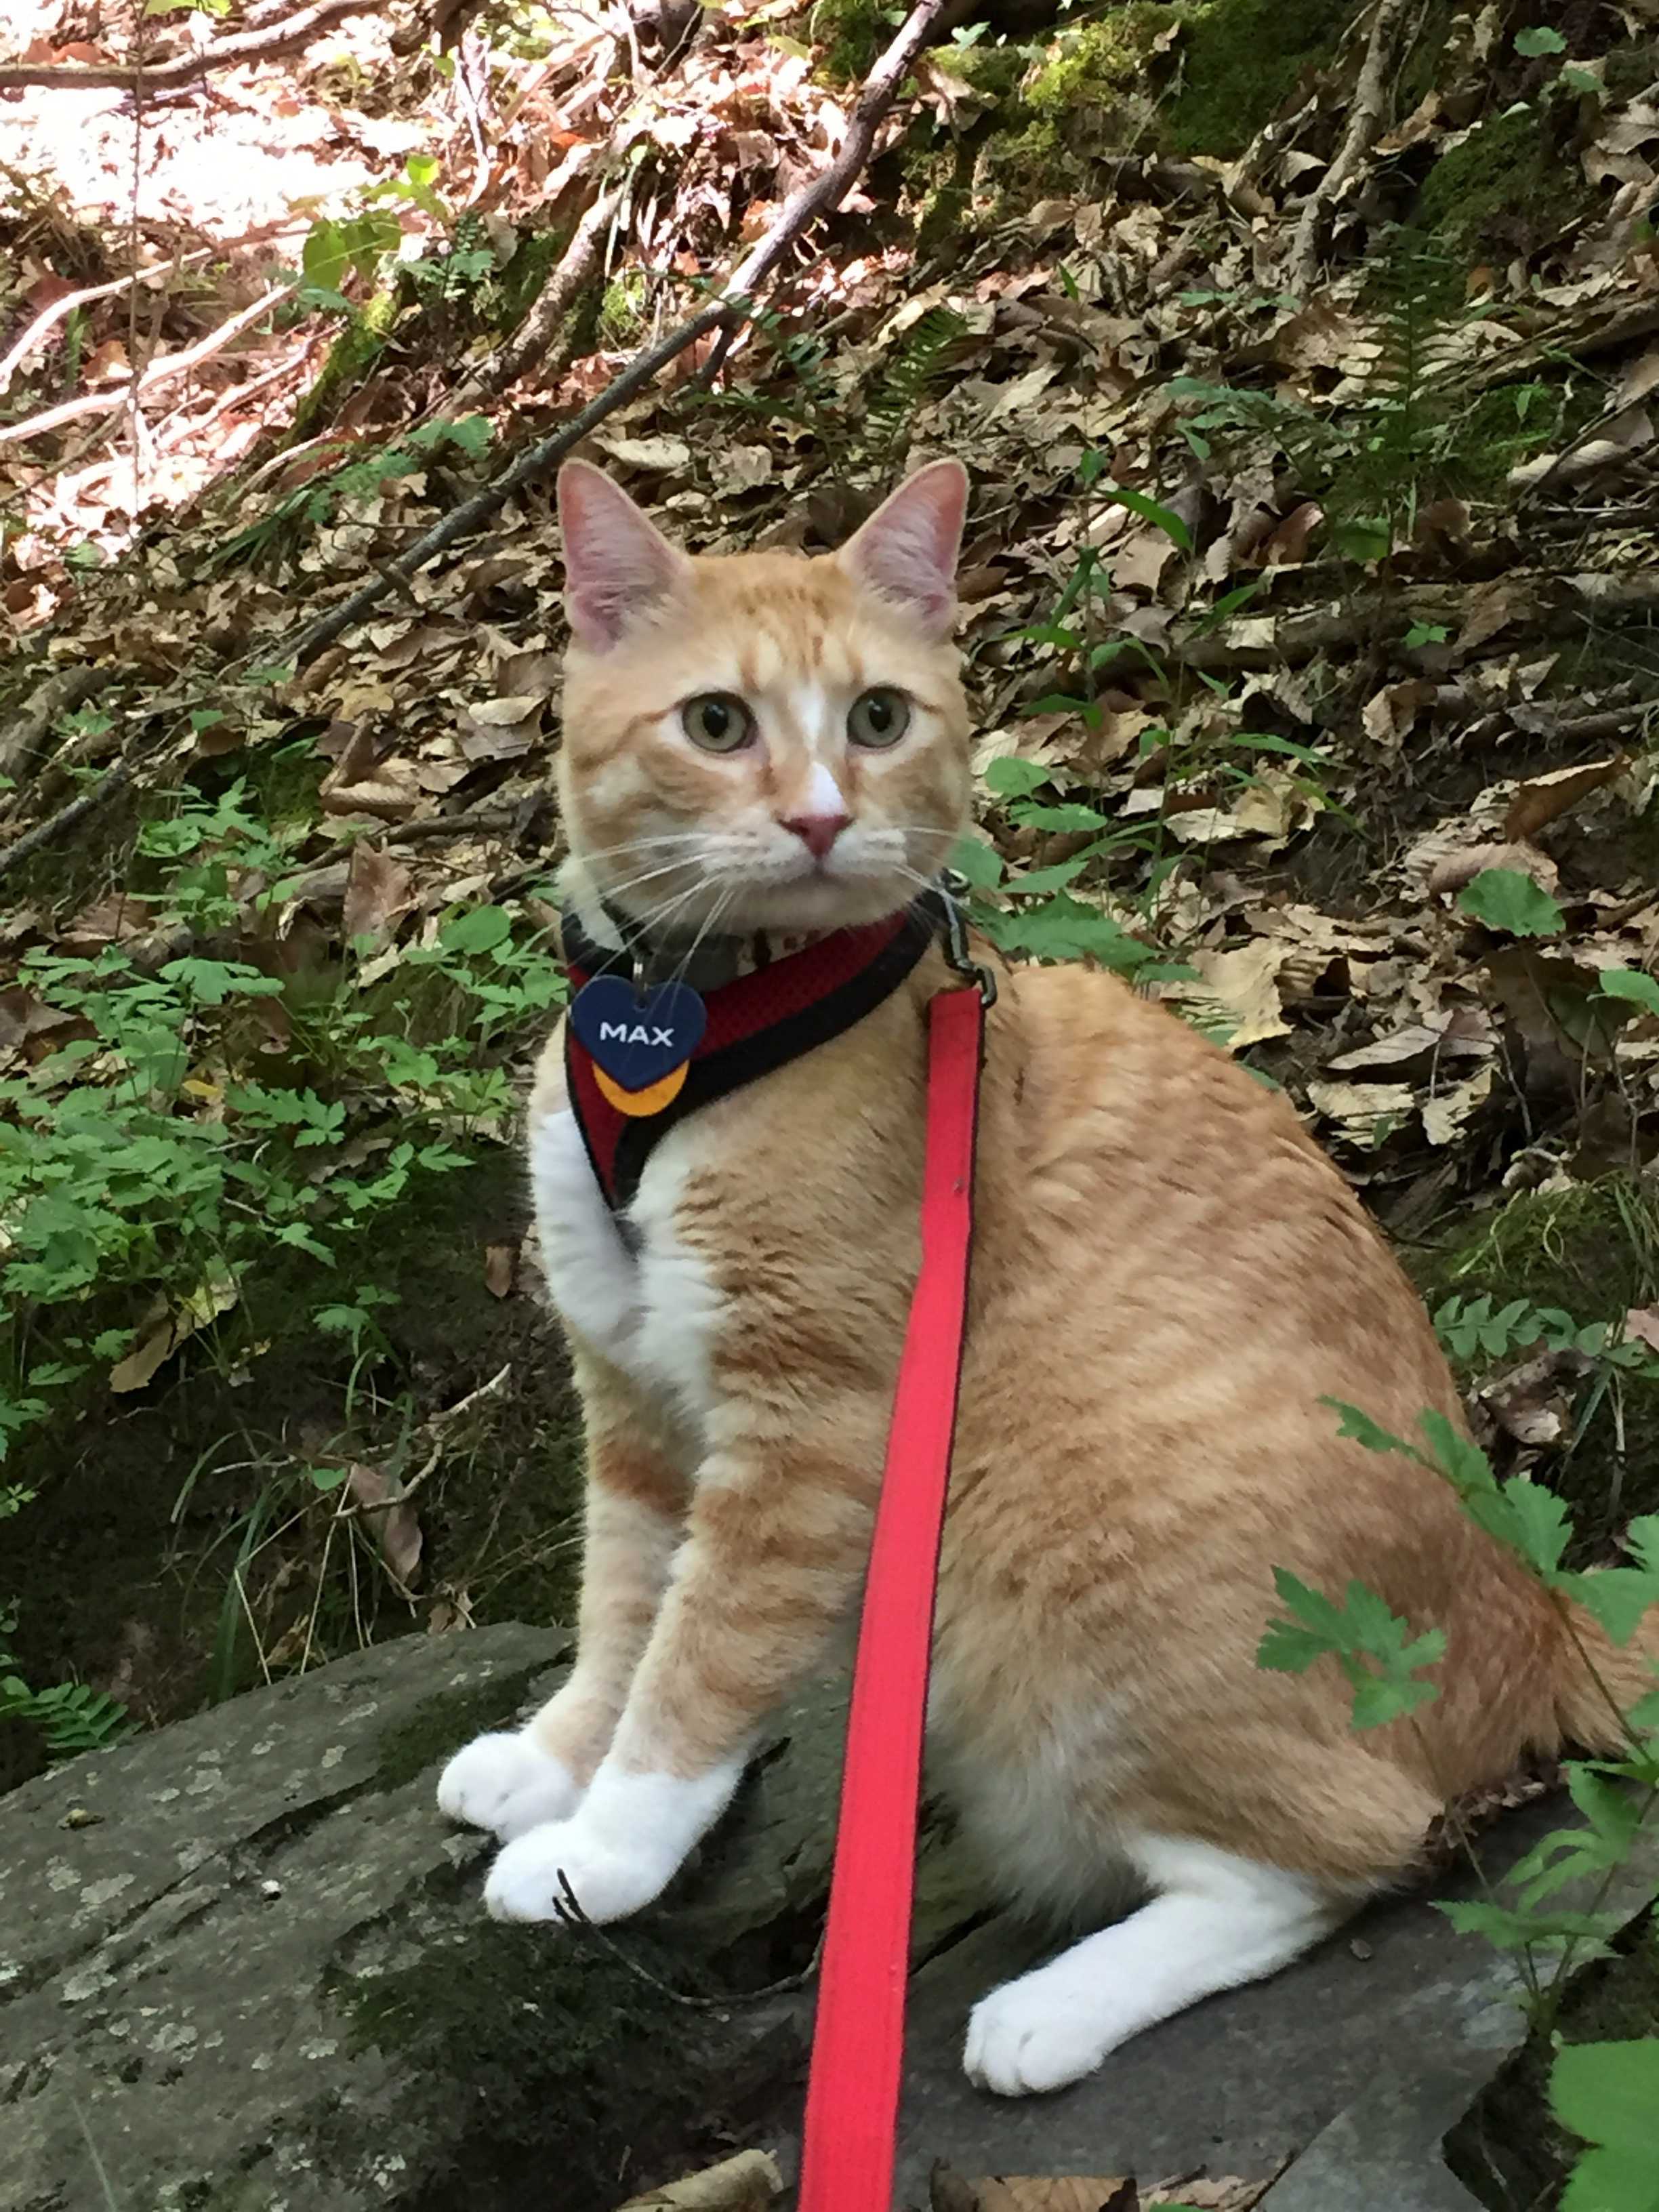 Consignment Source overlook Max the Cat: Where is he now? - The Mac Weekly